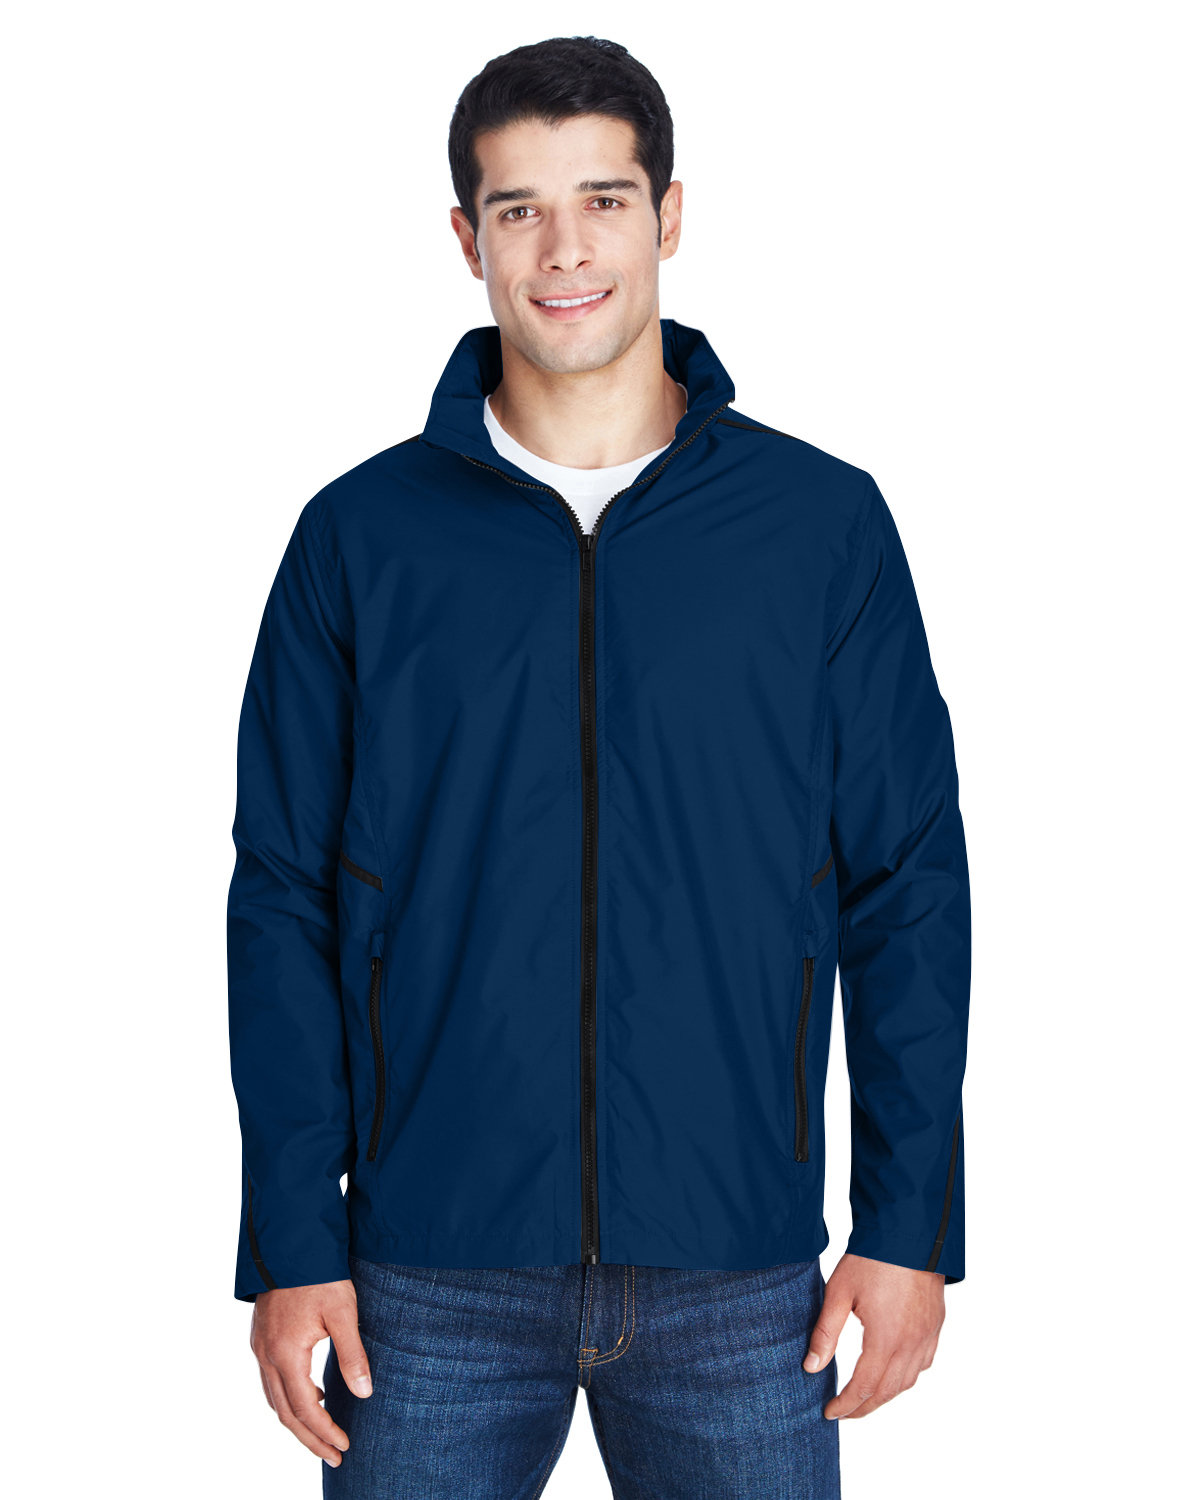 Team 365 Adult Conquest Jacket with Mesh Lining SPORT DARK NAVY 